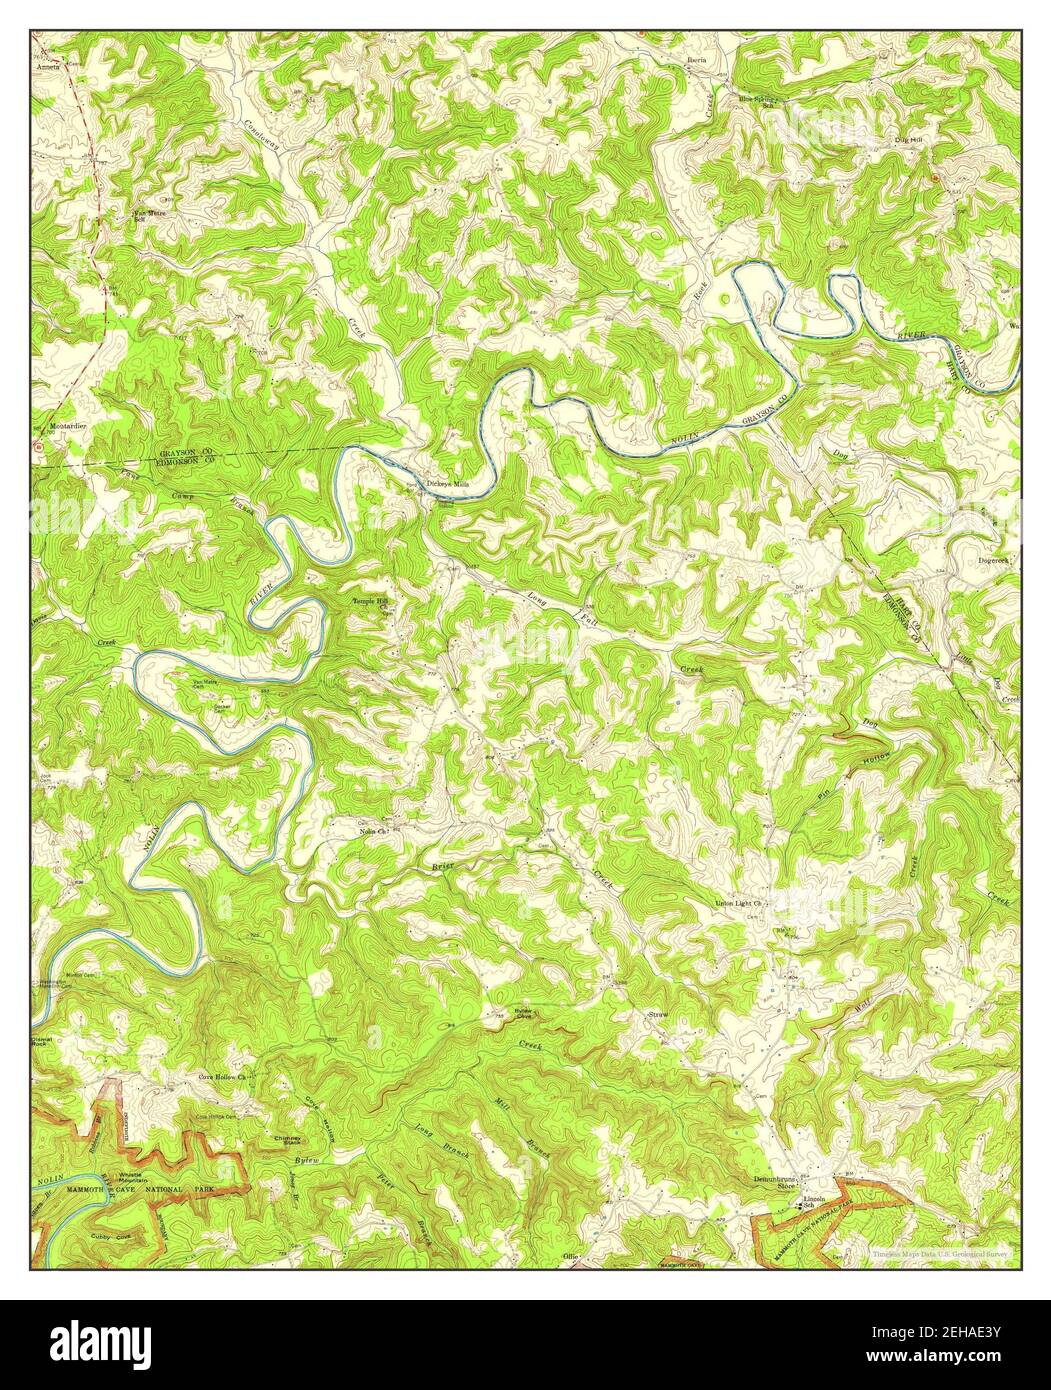 Dickeys Mills, Kentucky, map 1954, 1:24000, United States of America by Timeless Maps, data U.S. Geological Survey Stock Photo